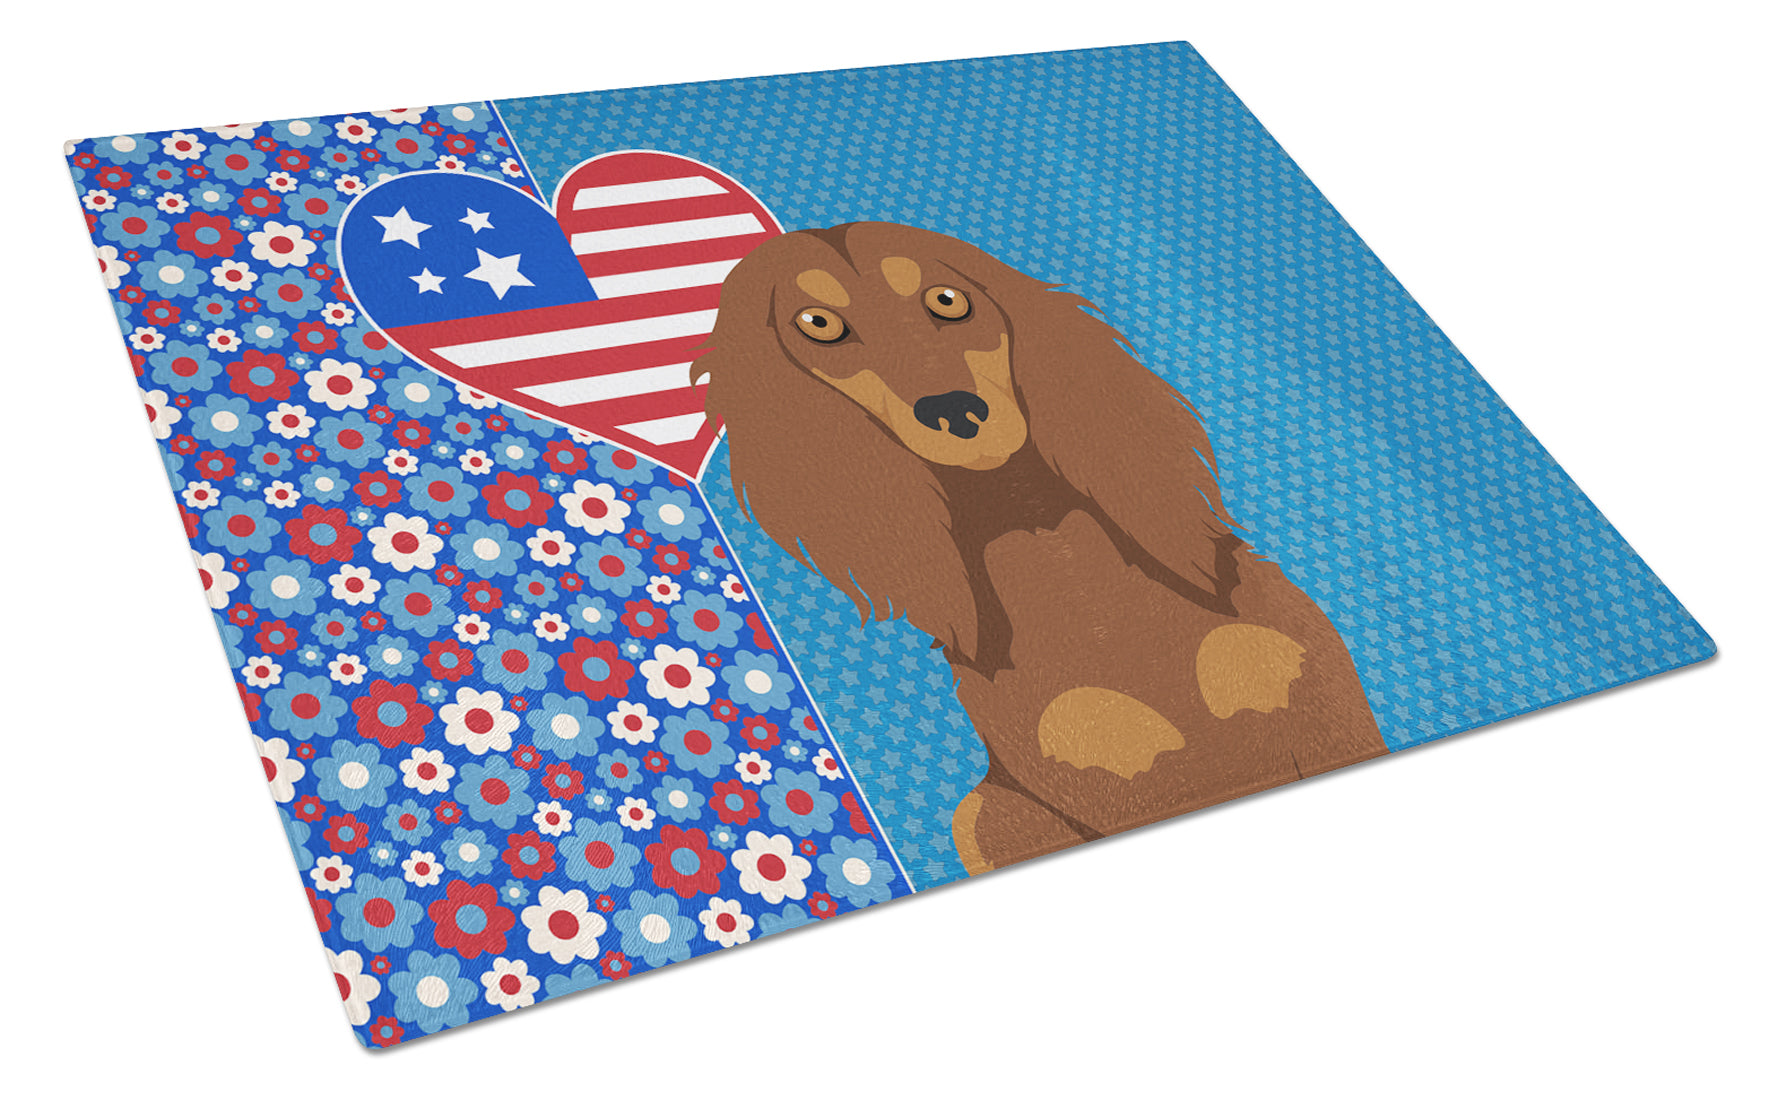 Buy this Longhair Chocolate and Tan Dachshund USA American Glass Cutting Board Large